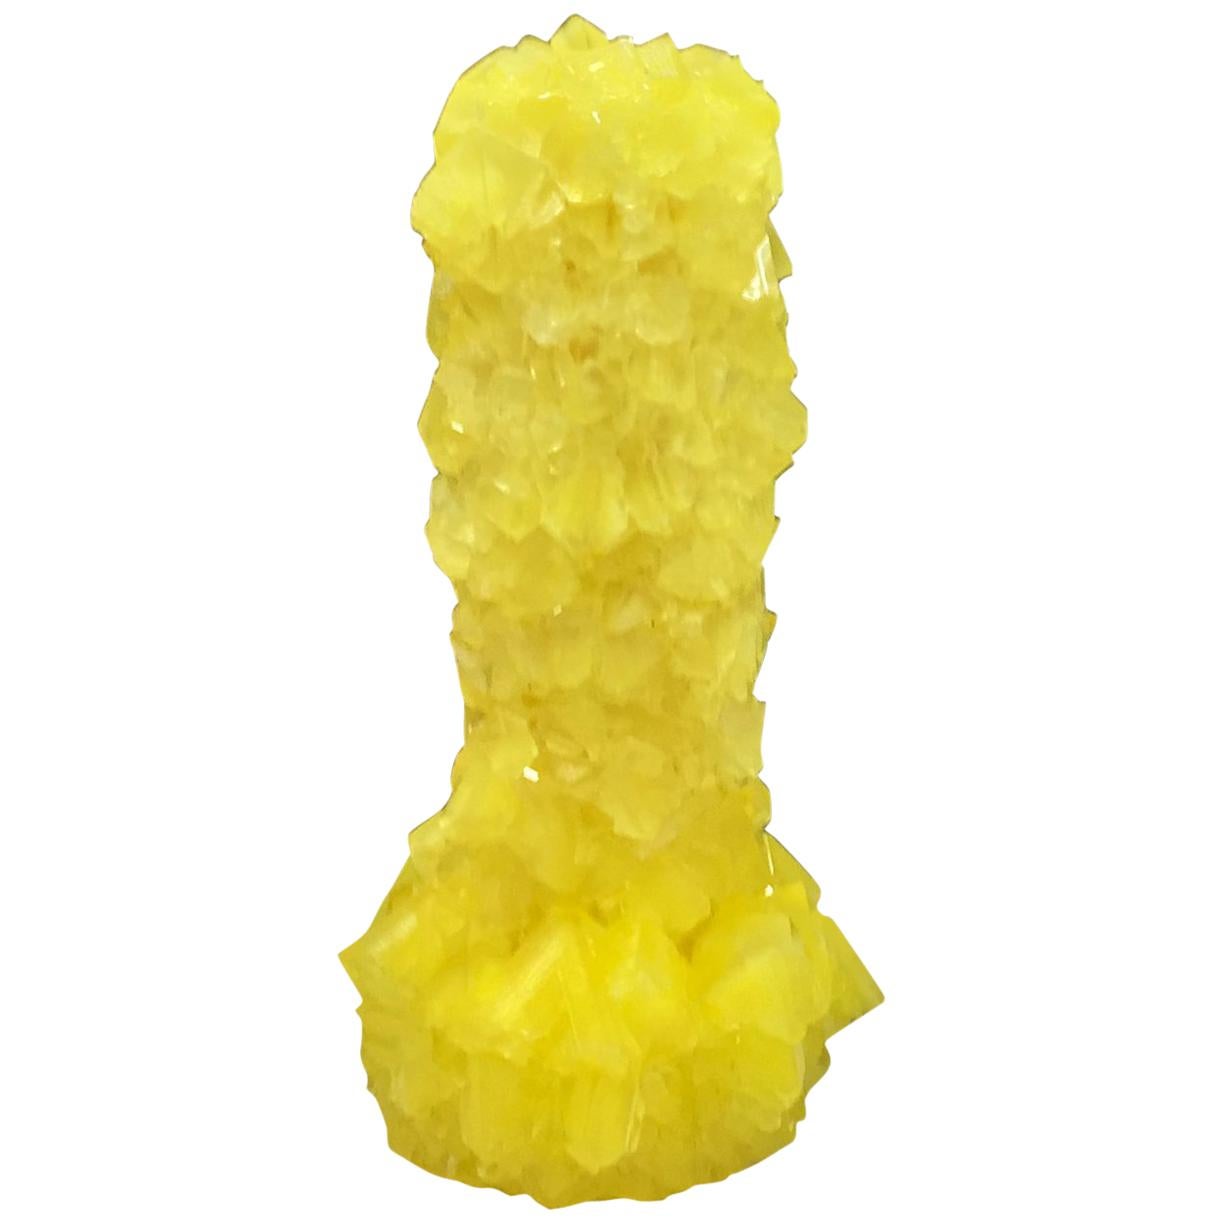 Crystallized Yellow Vase, Unique Vase by Isaac Monte